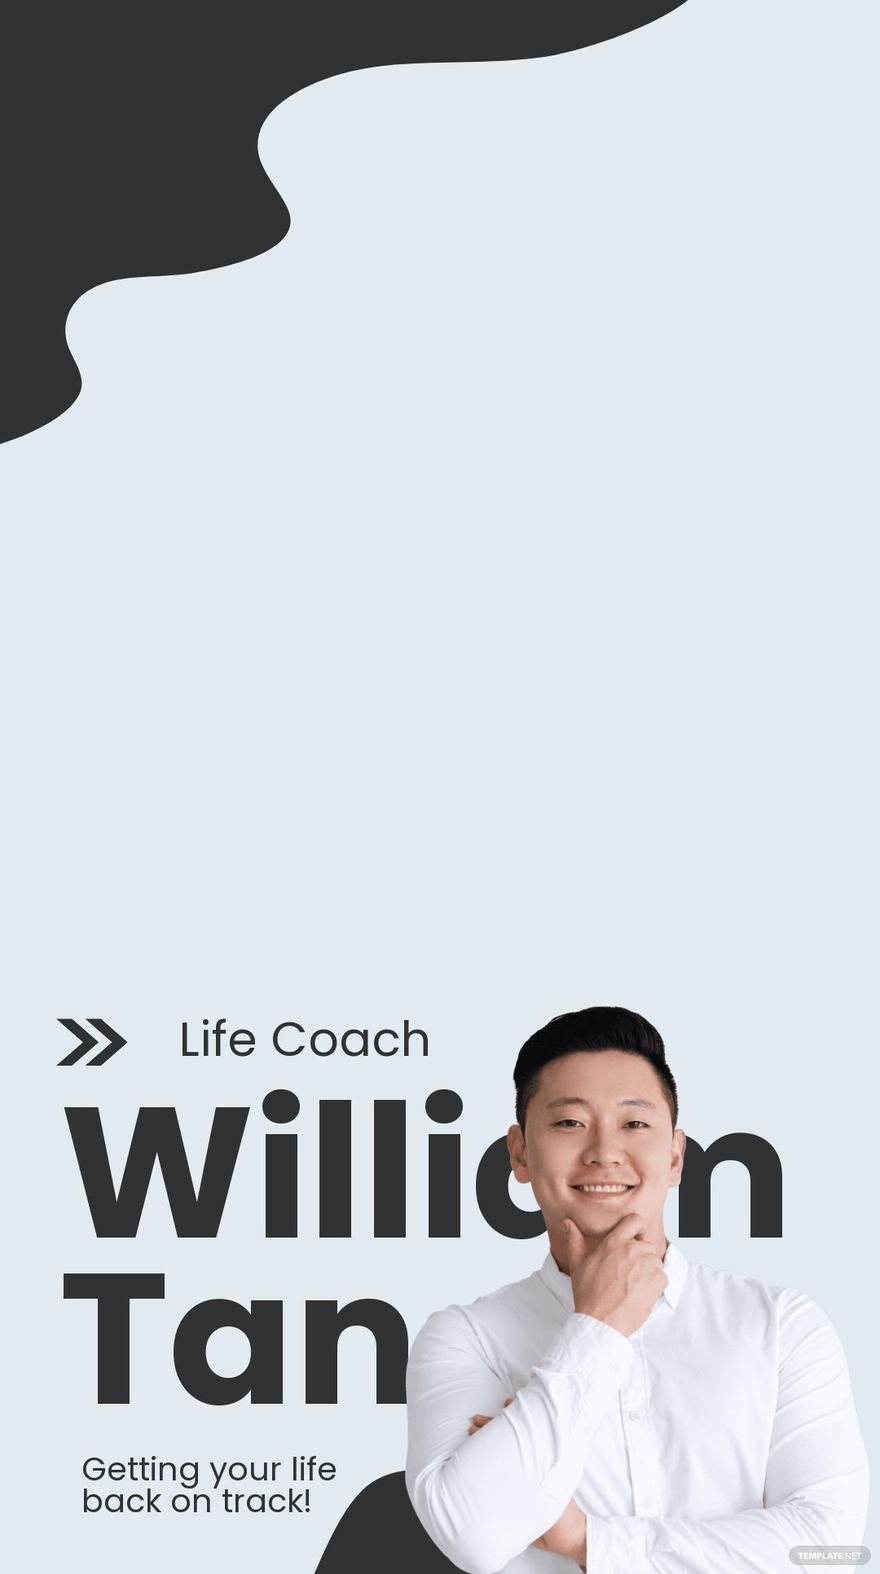 Life Coach Snapchat Geofilter Template